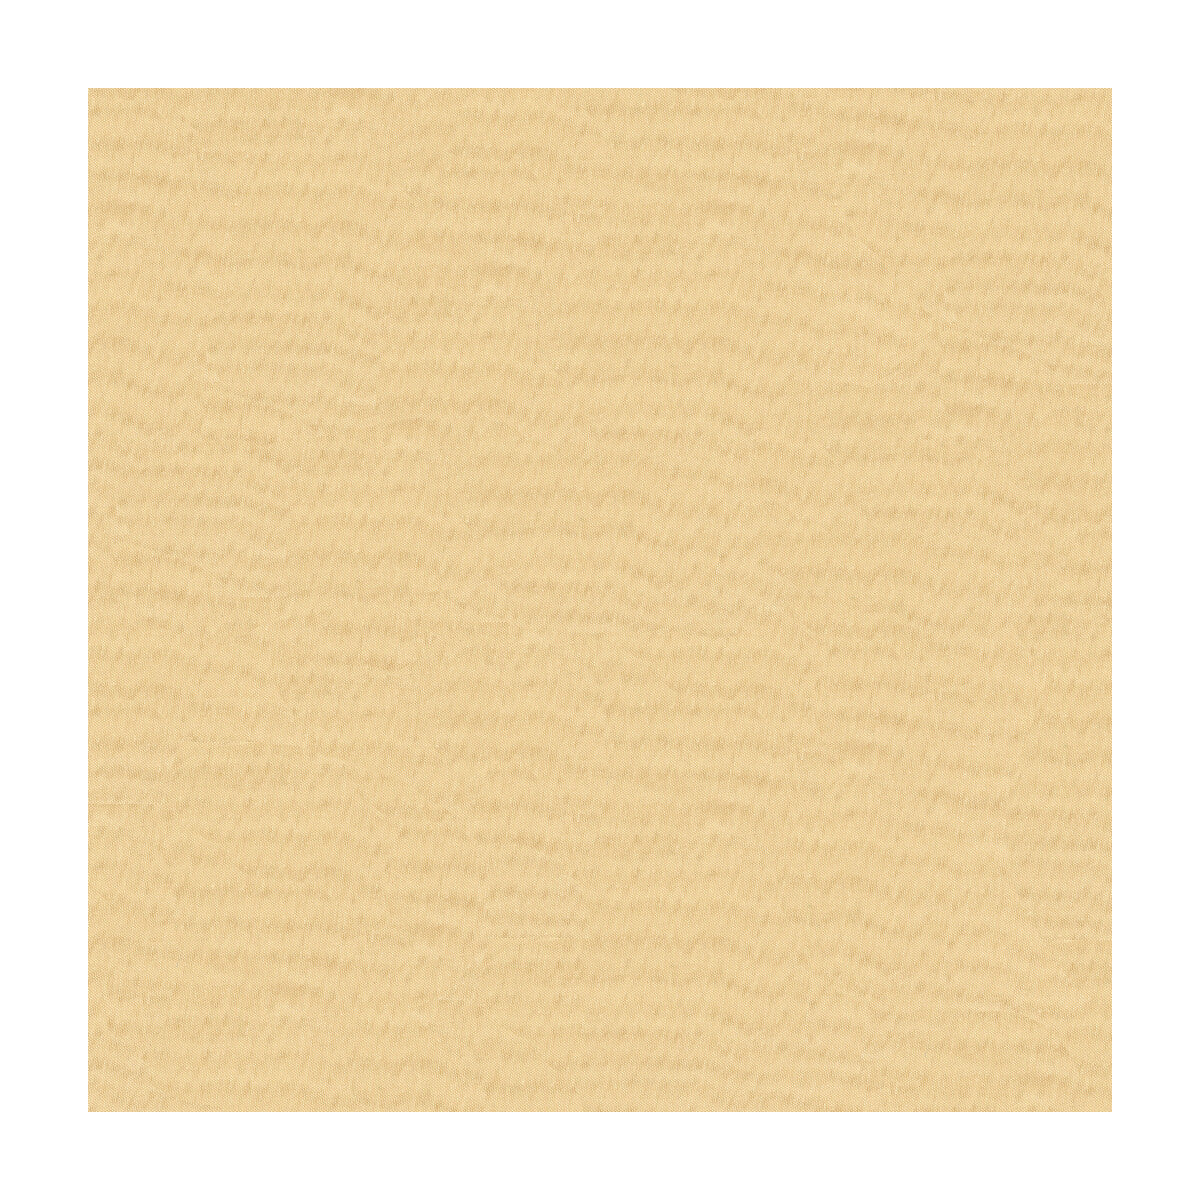 Kravet Contract fabric in 4150-16 color - pattern 4150.16.0 - by Kravet Contract